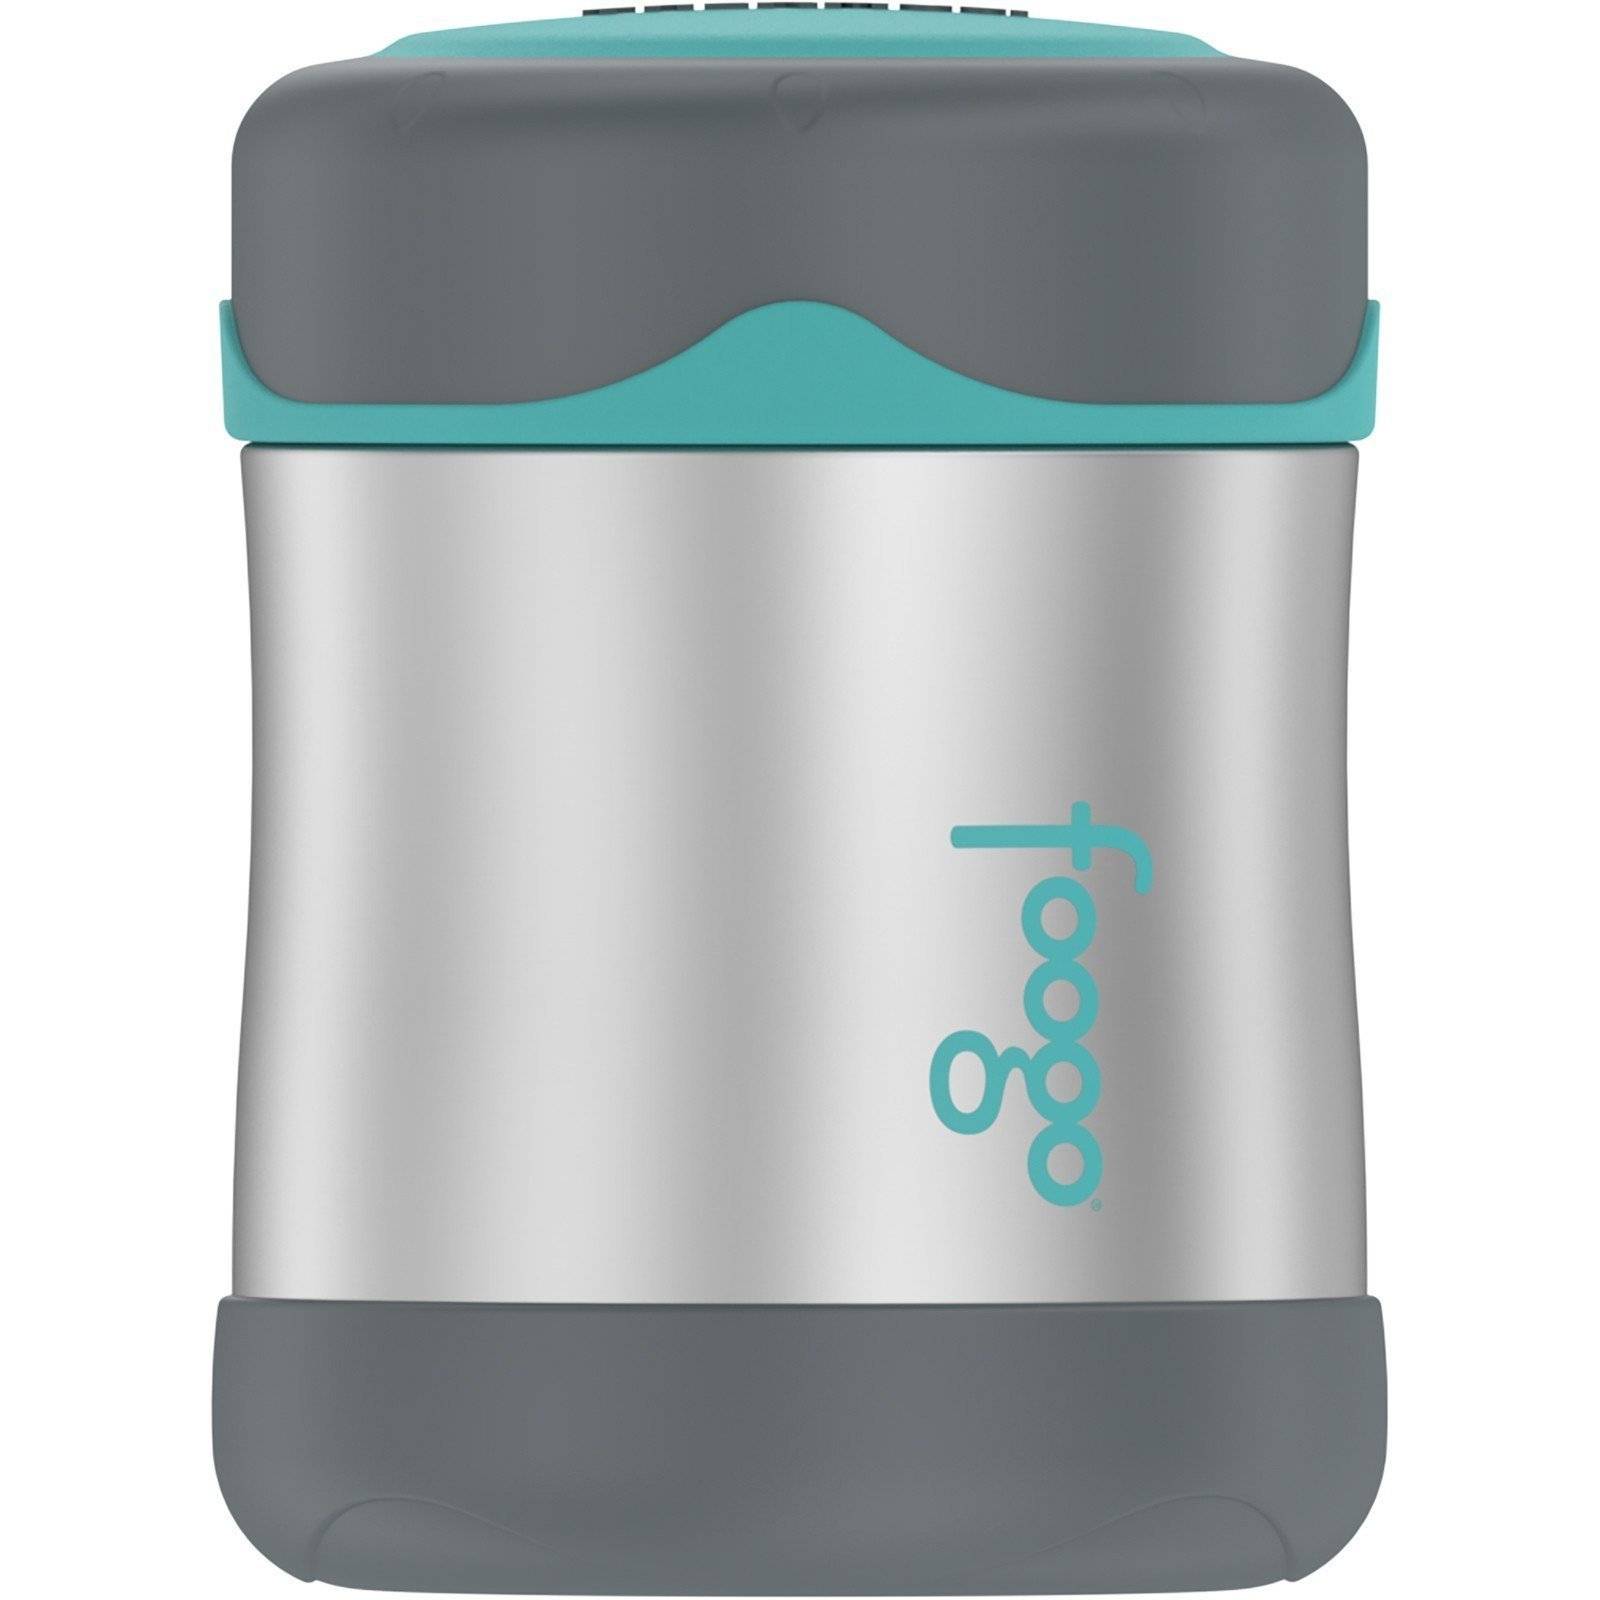 Thermos Foogo Vacuum Insulated Stainless Steel Food Jar (Charcoal/ Teal)